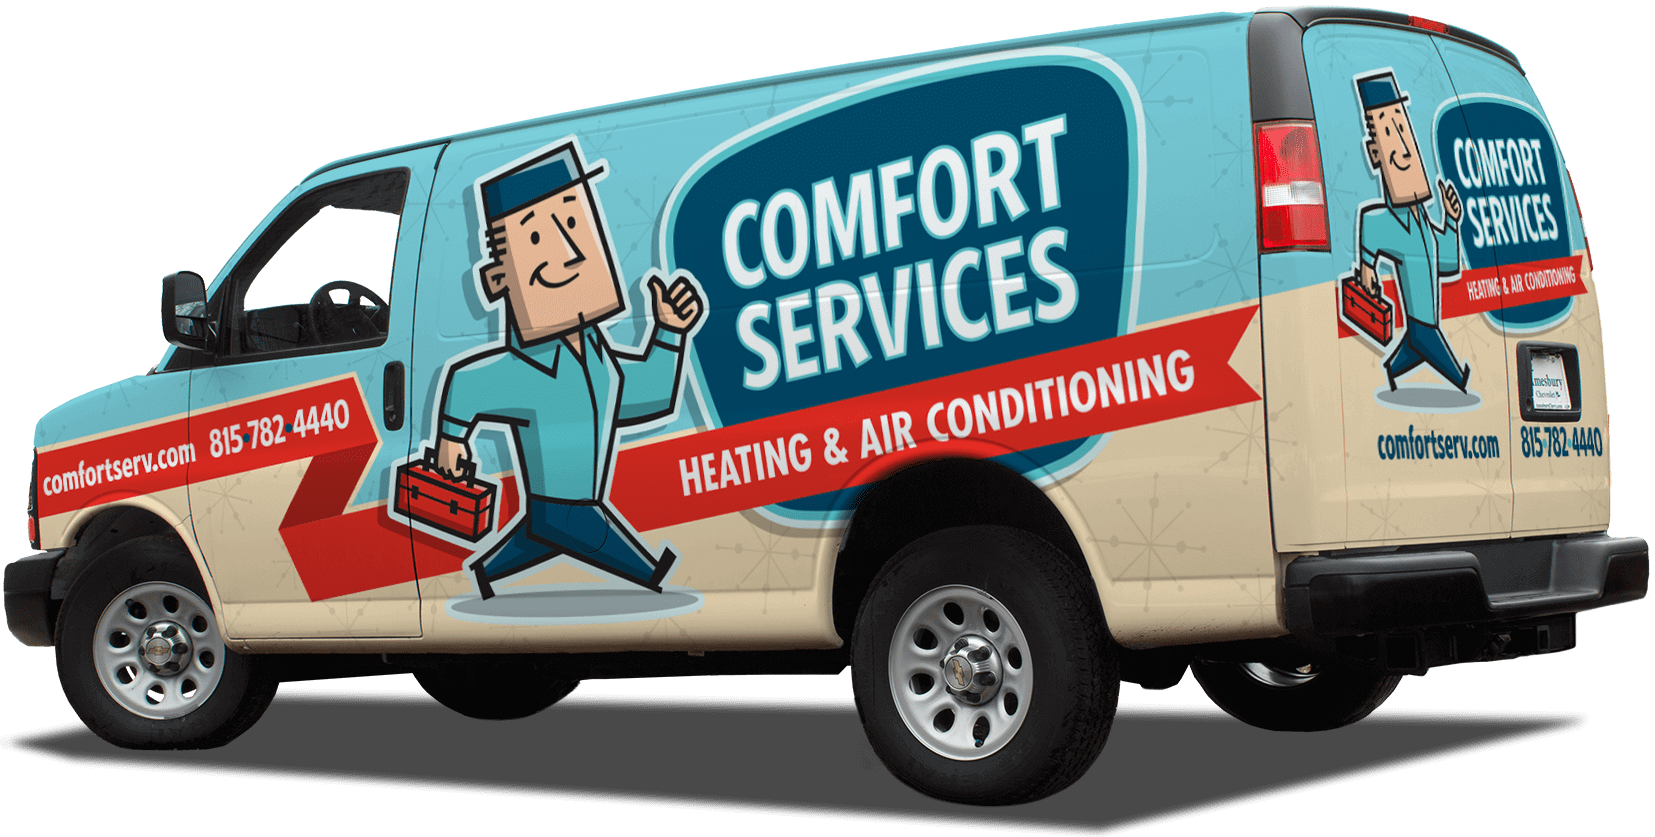 See what makes Comfort Services Heating & Air Conditioning your number one choice for Heating repair in Naperville IL.